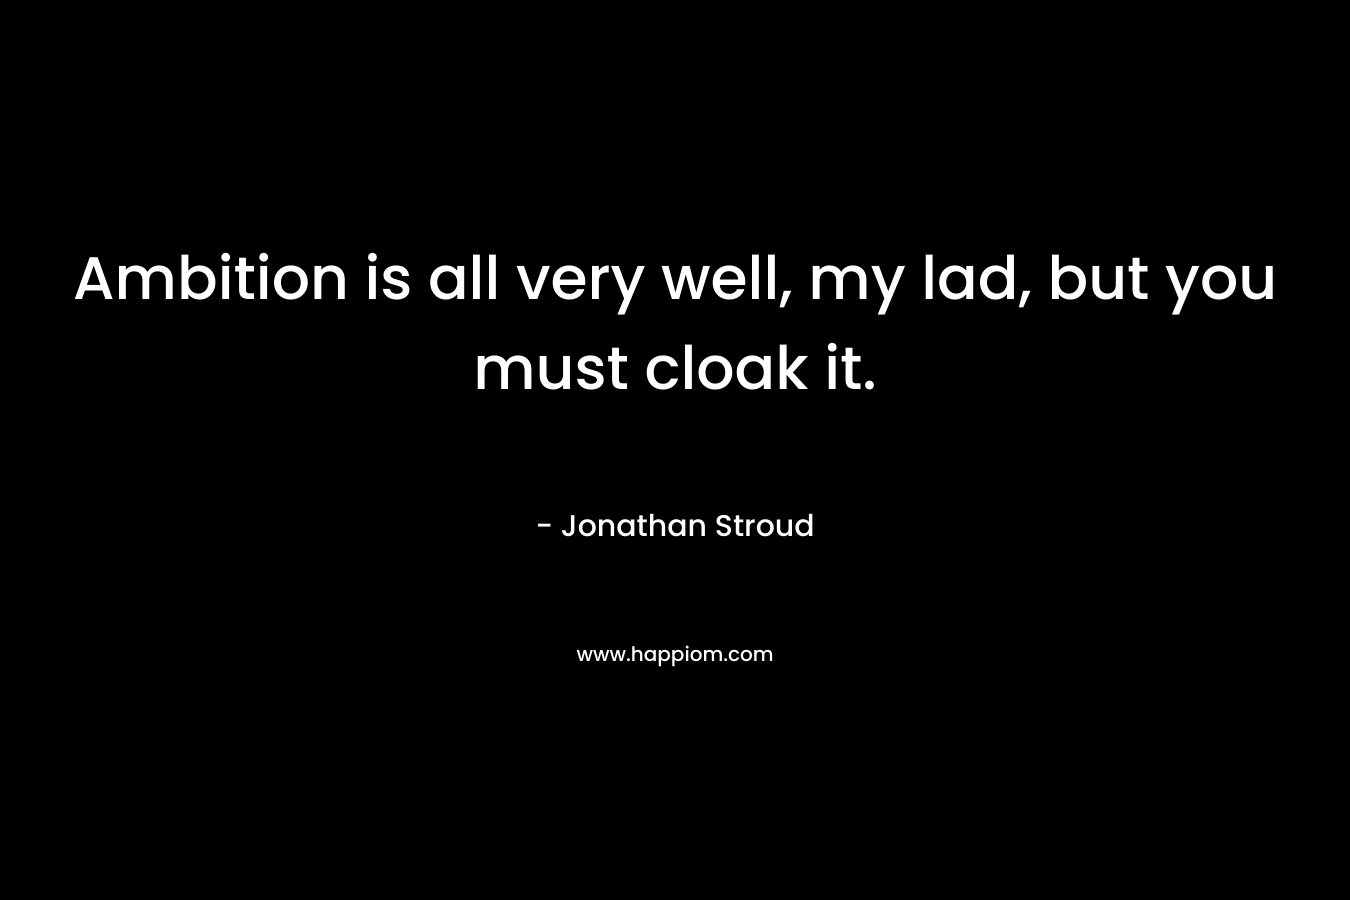 Ambition is all very well, my lad, but you must cloak it. – Jonathan Stroud